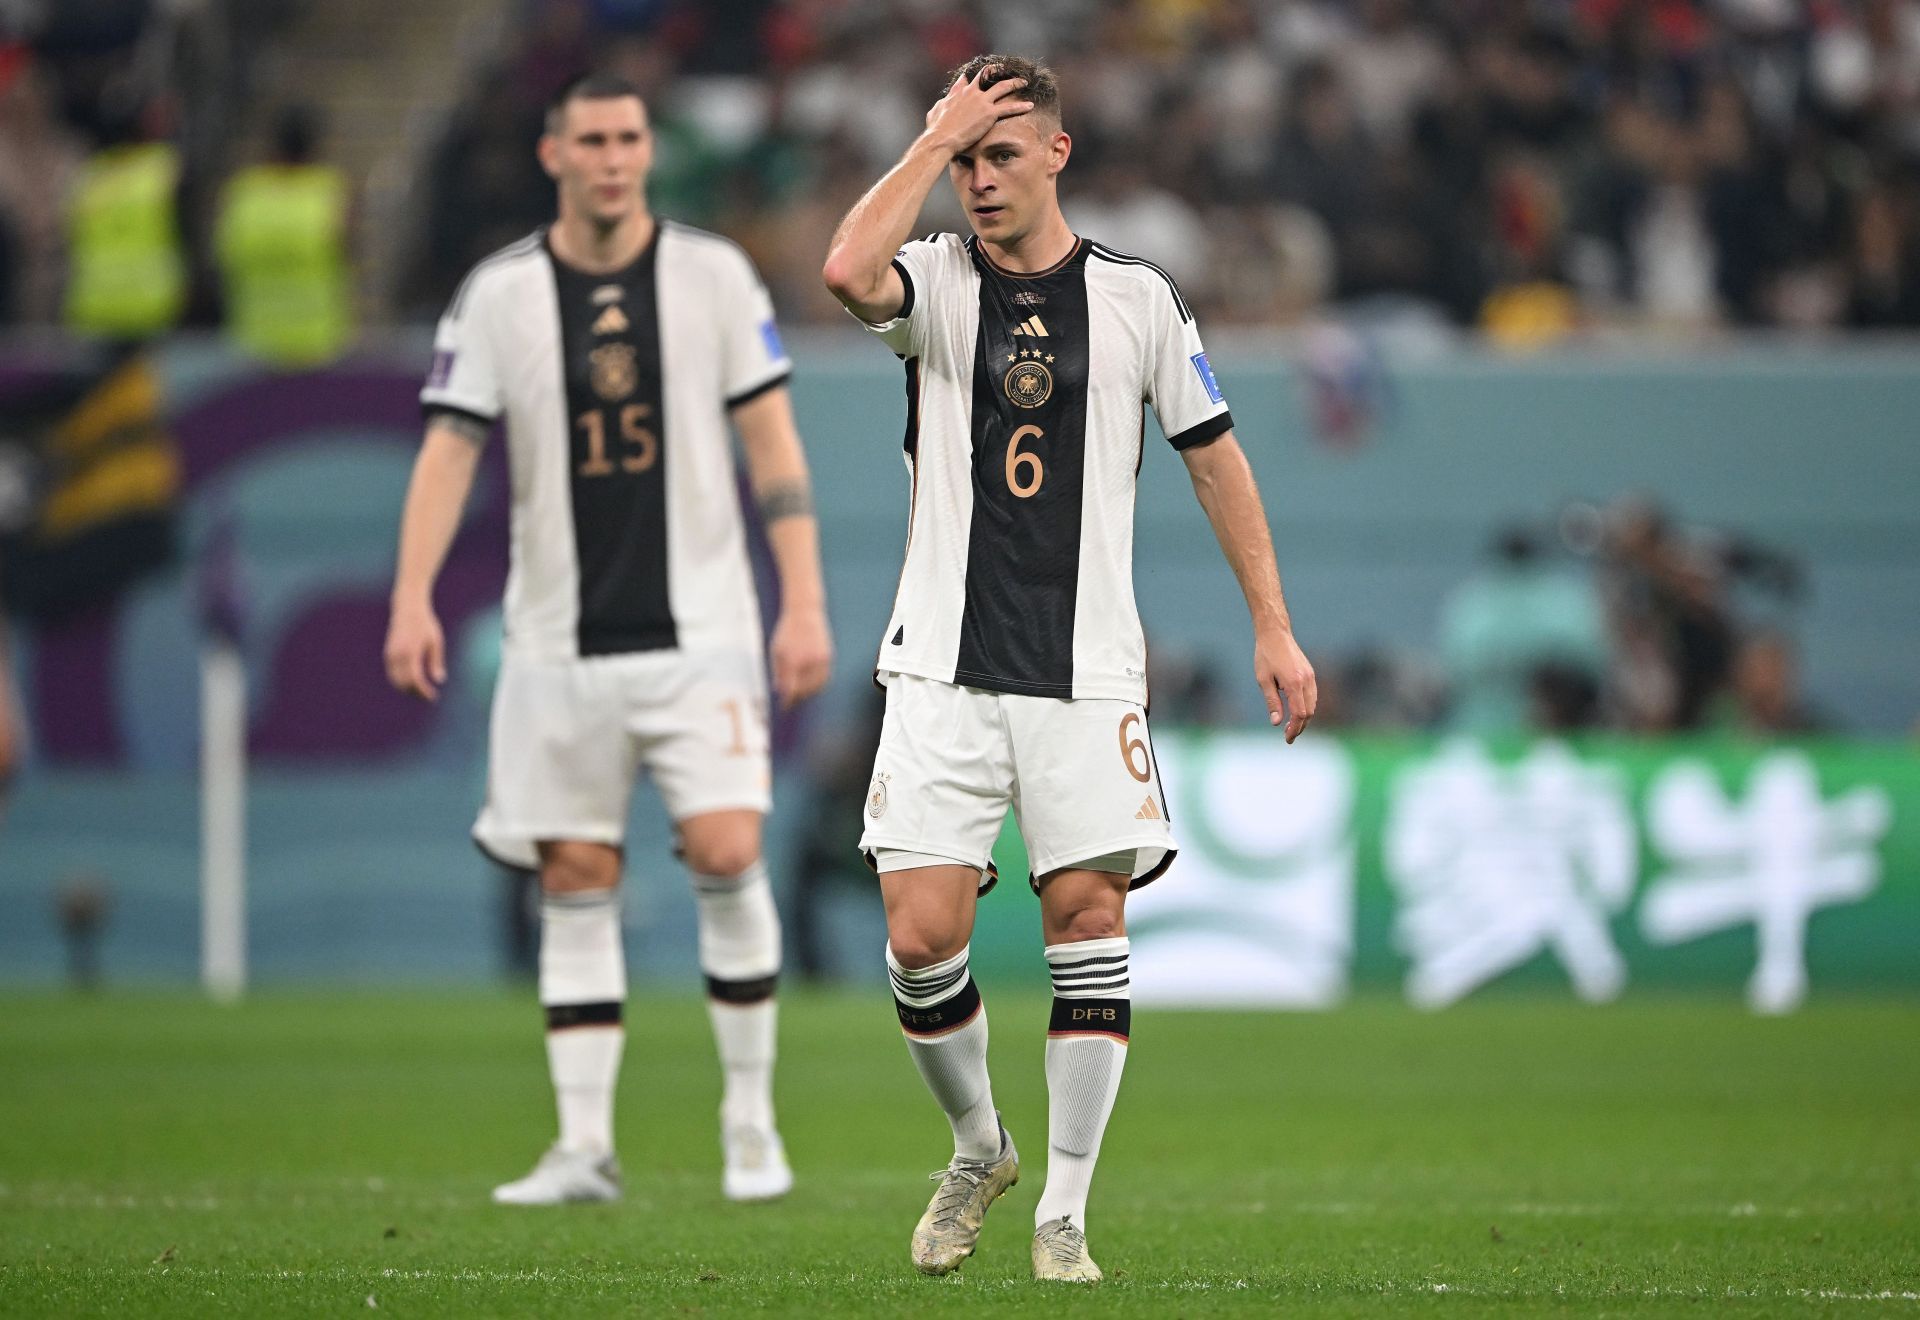 Germany were knocked out at the group stage